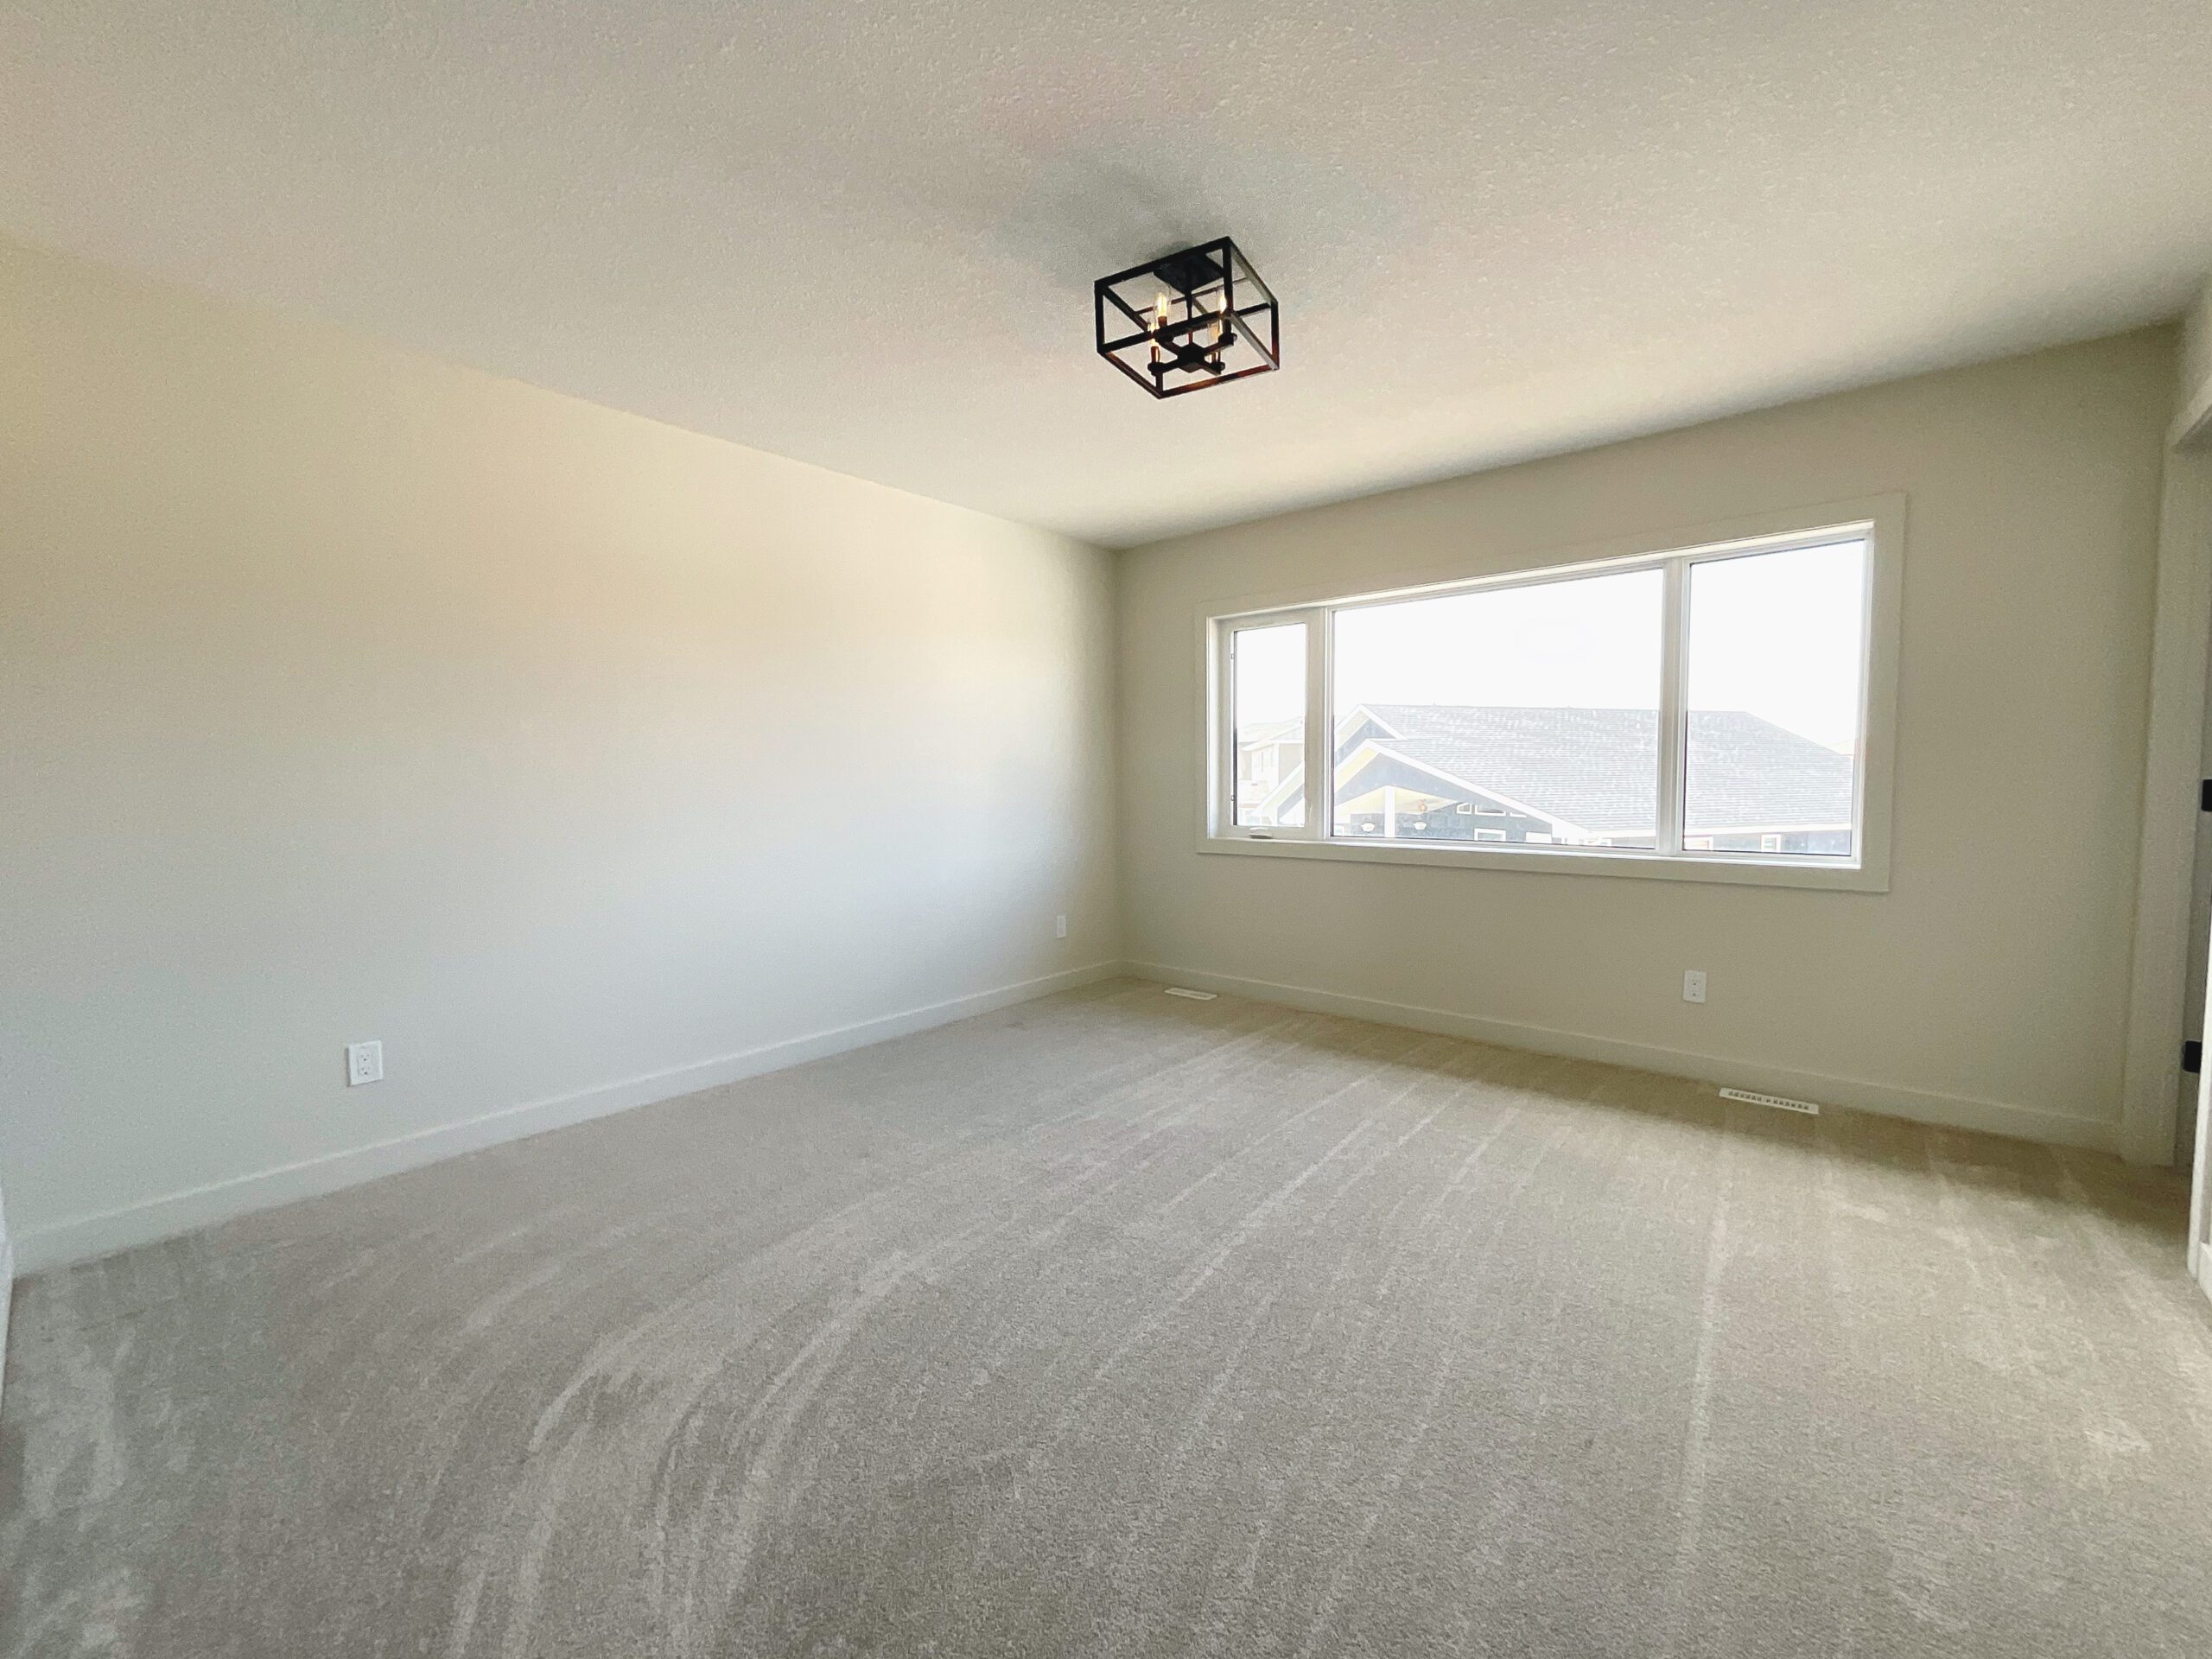 An empty primary bedroom with a large window and a semi-flush light fixture with carpet flooring.